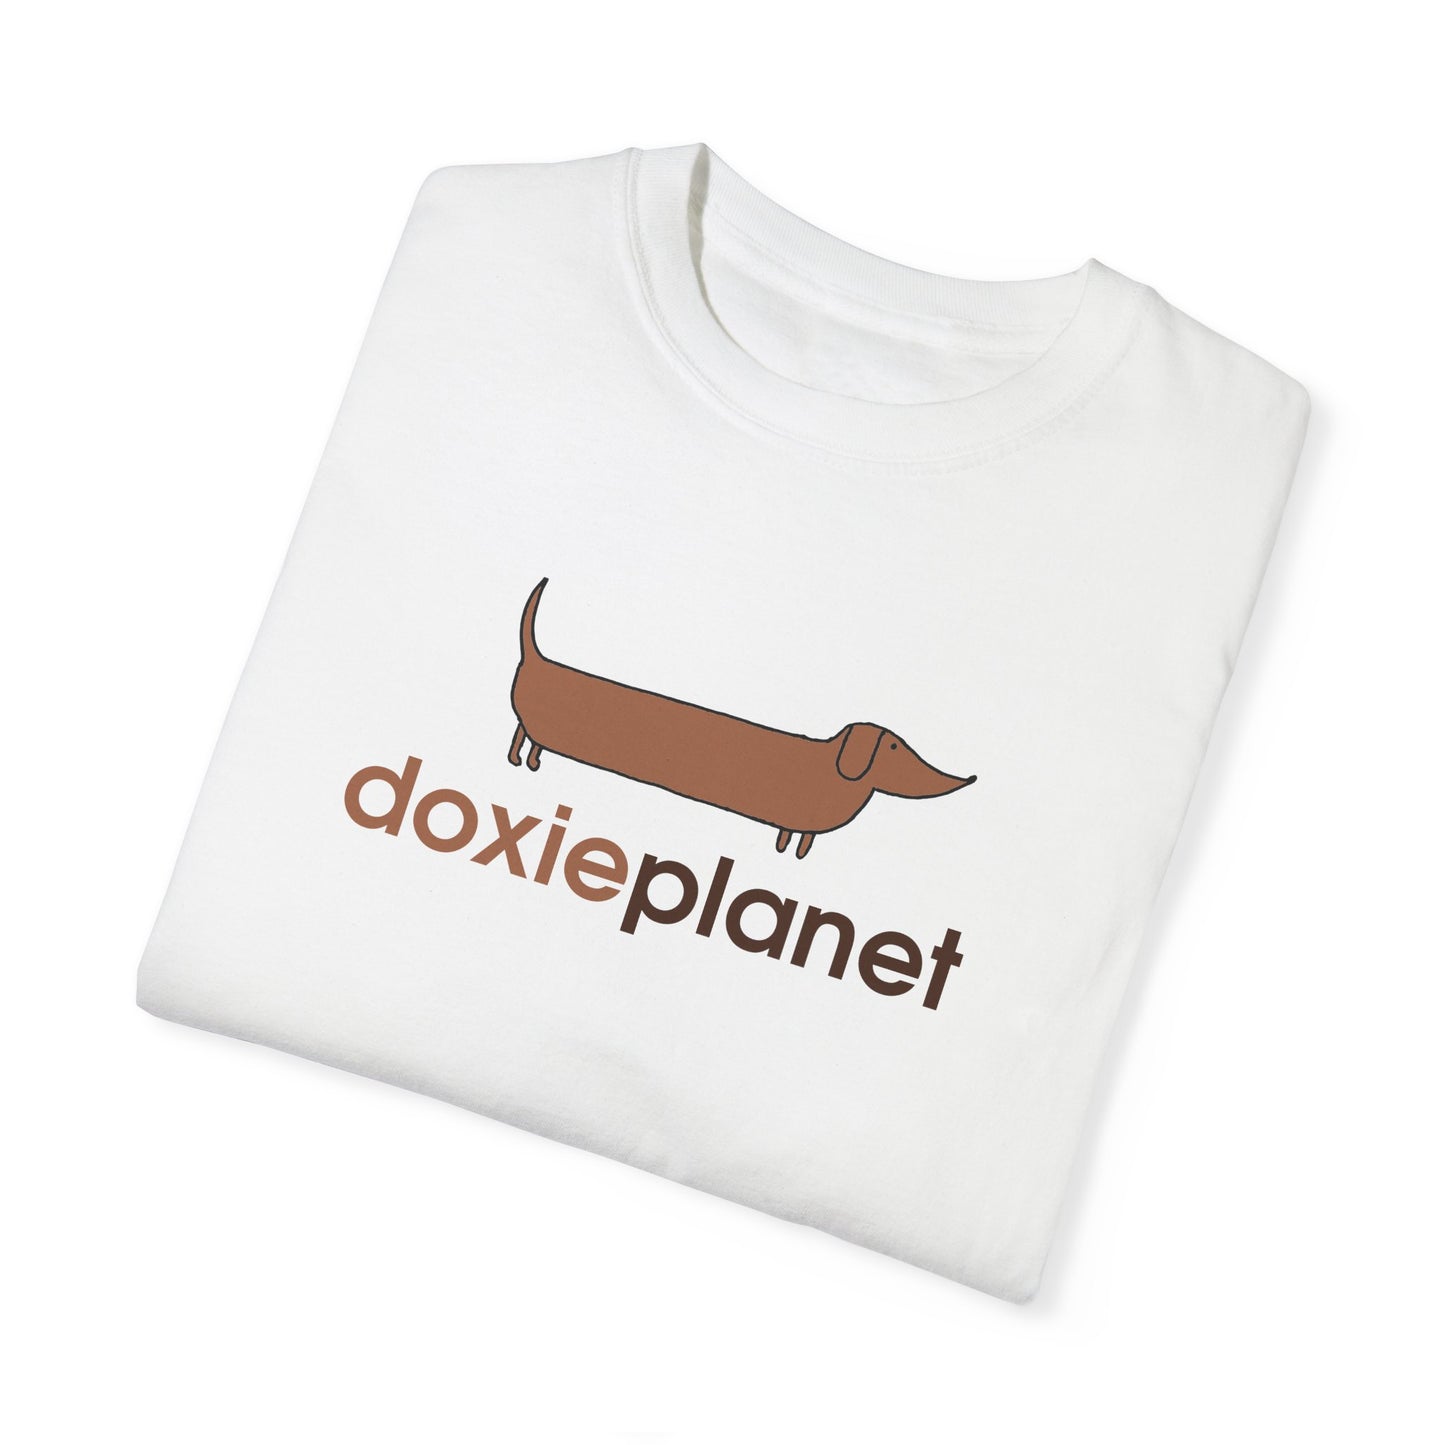 Doxie Planet Garment-Dyed T-shirt